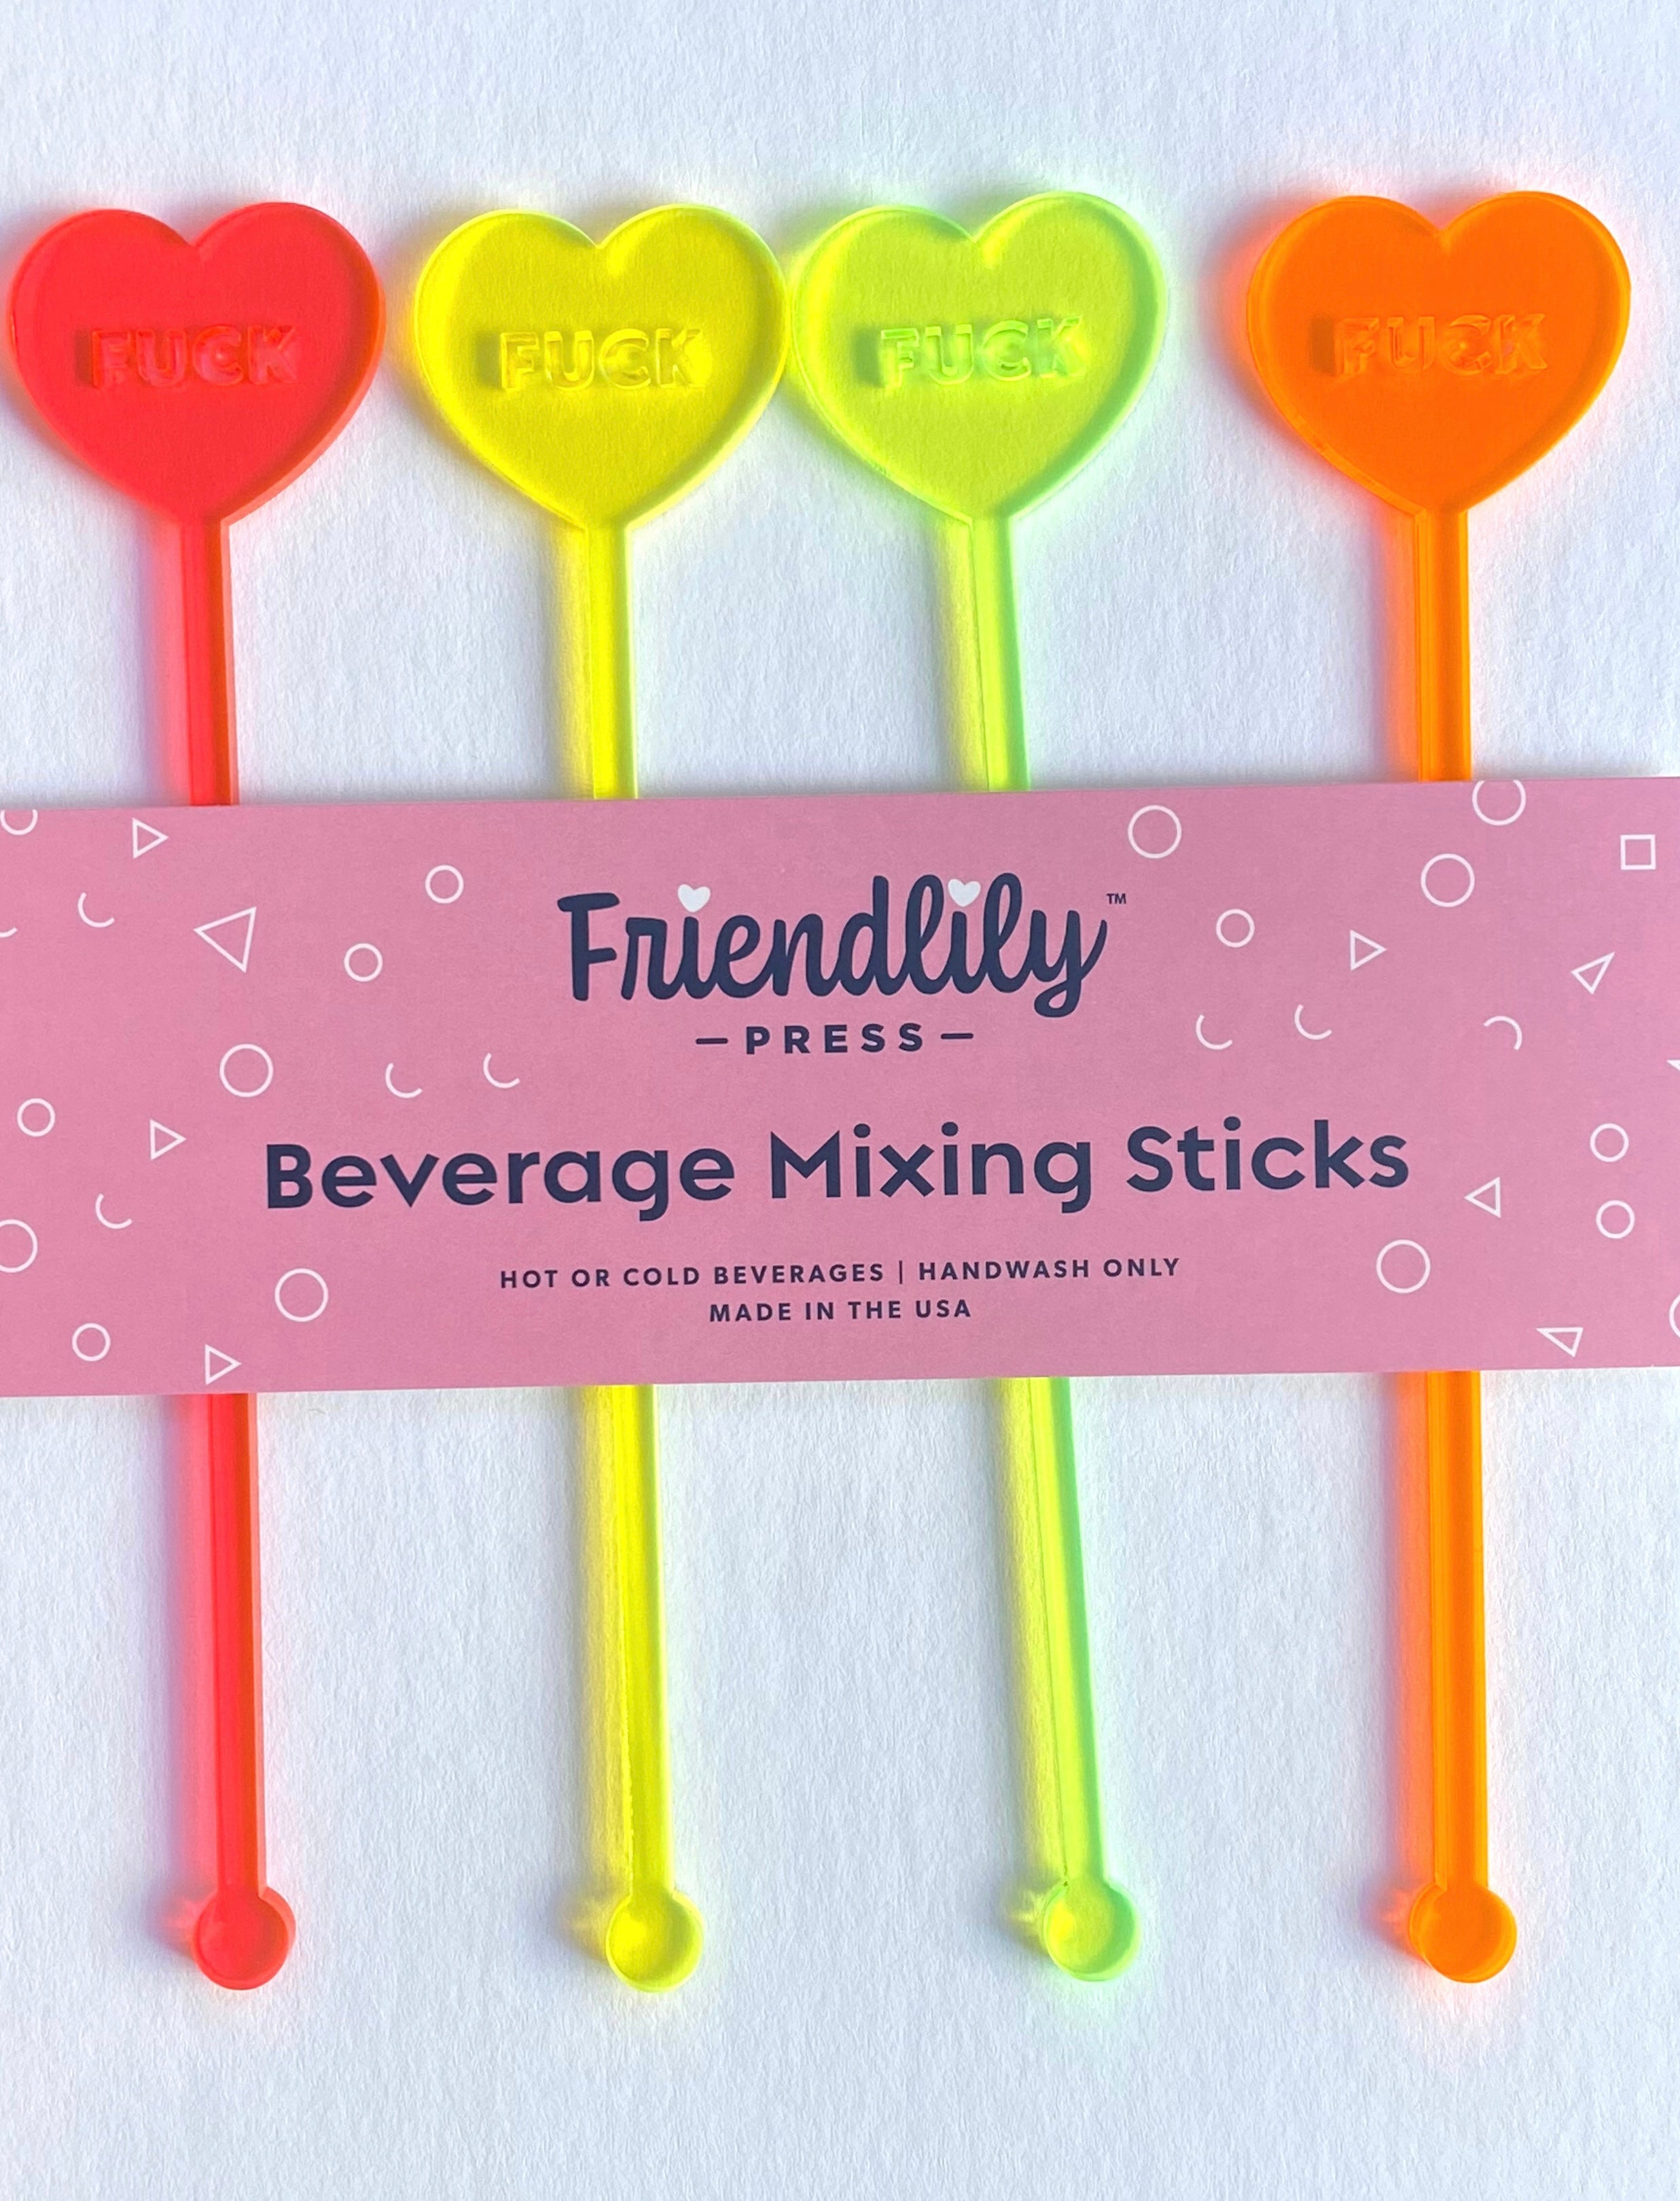 FUCK Hearts Drink Stirrer Set by Friendlily. Neon drink stirrers. Drink stirrers for neon party. Neon party decor. Cocktail mixing sticks that are heart shaped. FUCK drink stirrers.